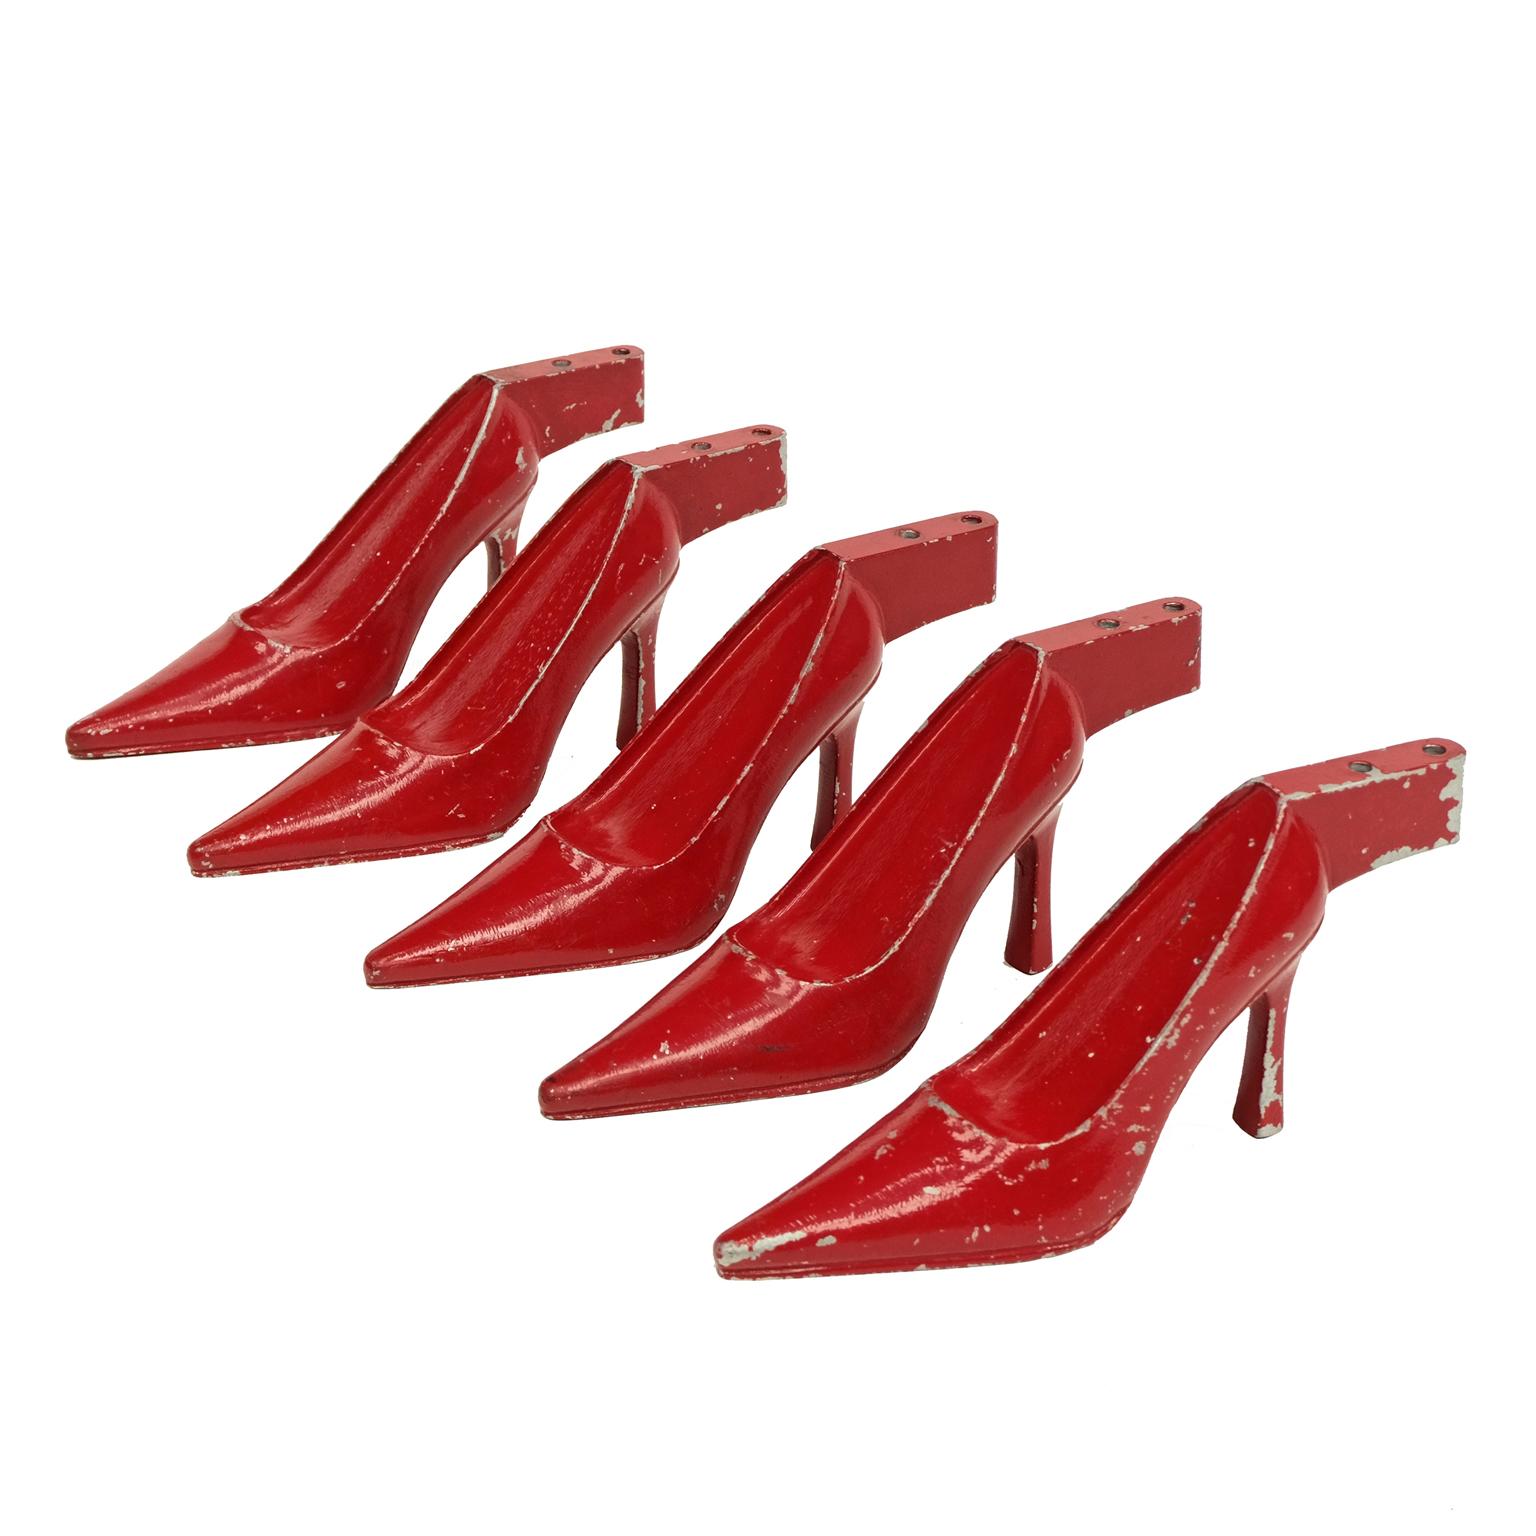 1950s Stiletto shoe displays. Red painted steel form designed and manufactured in the United Kingdom. Priced per shoe.

The shoes can be displayed as a group or individually. 

Signs of original age to the red painted surface.
Each shoe weighs an